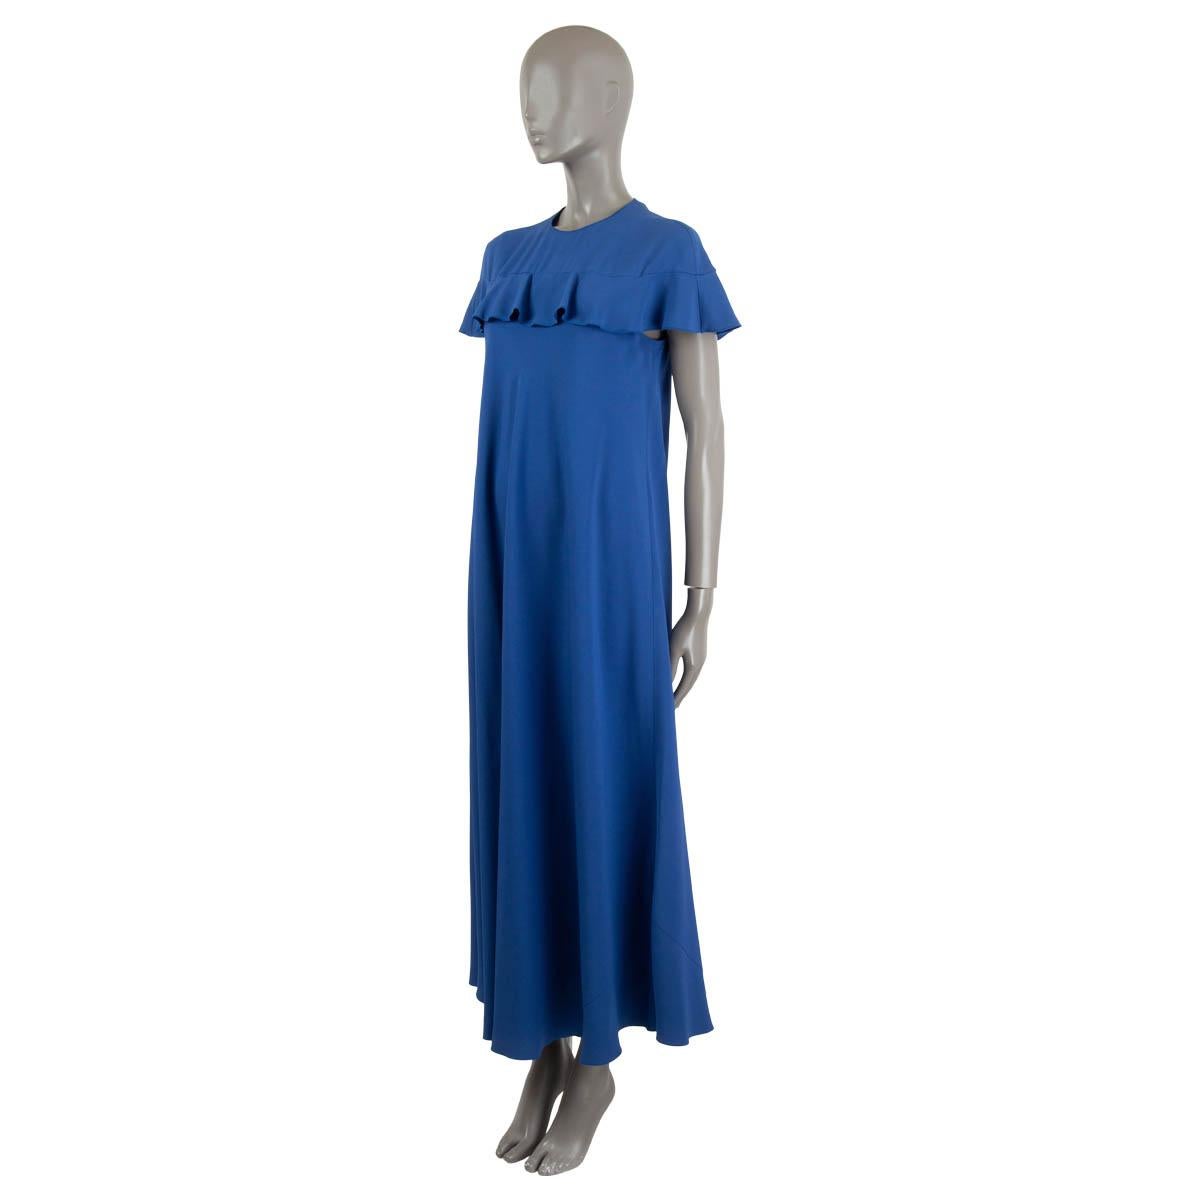 100% authentic RED Valentino maxi dress in royal blue crepe de chine silk (100%). Features a flounce hem line and ruffels across the front and back, creating a cape inspired silhouette. Closes with a concealed zipper in the back. Unlined. Has been